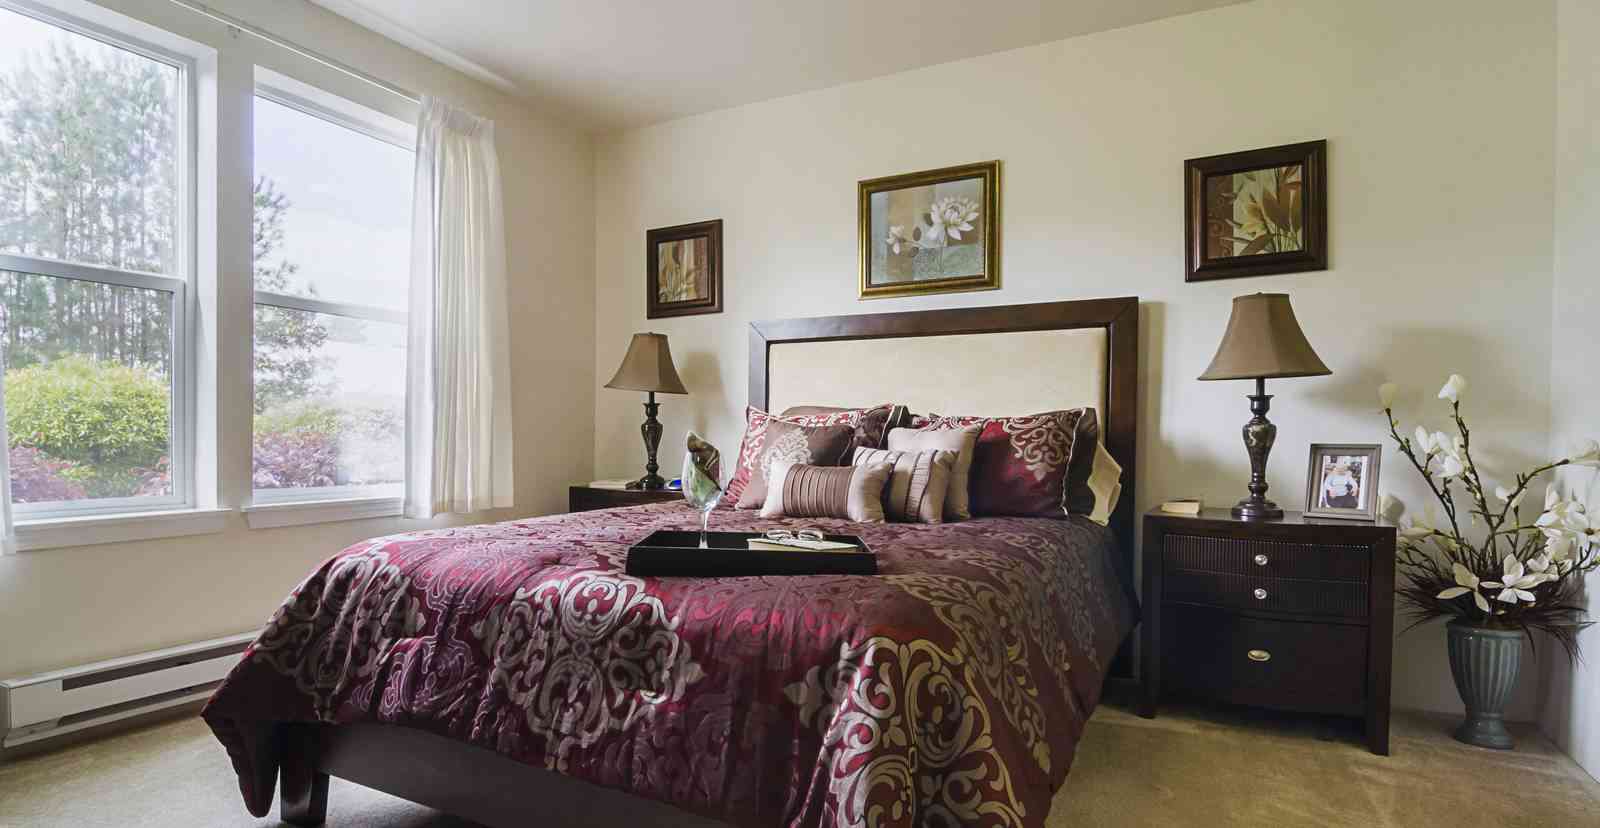 A cozy bedroom with a queen-sized bed covered in a red and beige patterned comforter set. There are nightstands with lamps on both sides of the bed, and framed artwork on the walls. A large window with white curtains allows natural light to fill the room.